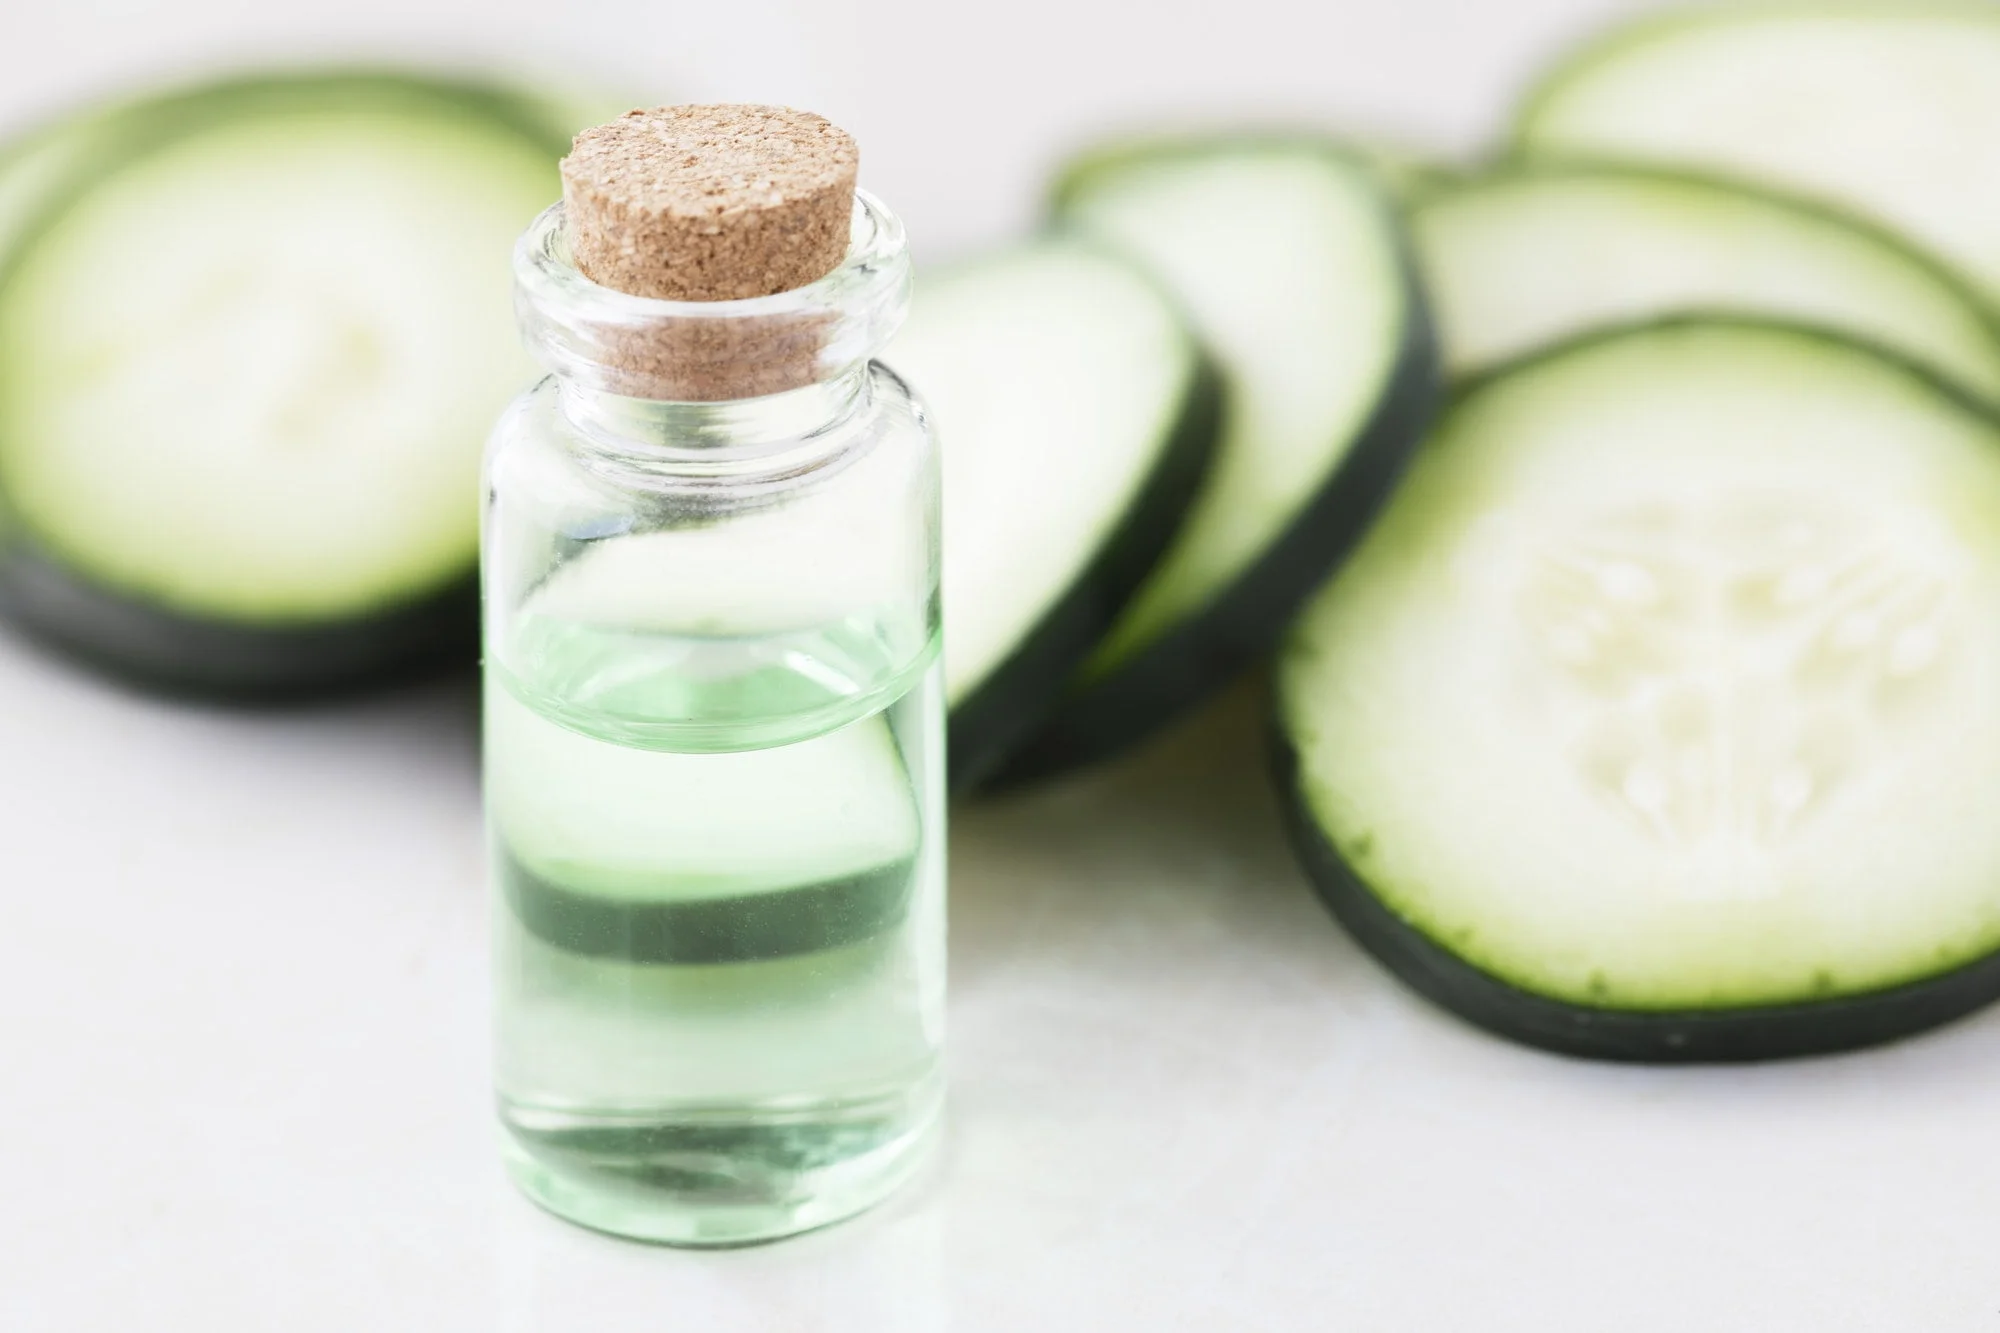 Cucumber Slices and Extract